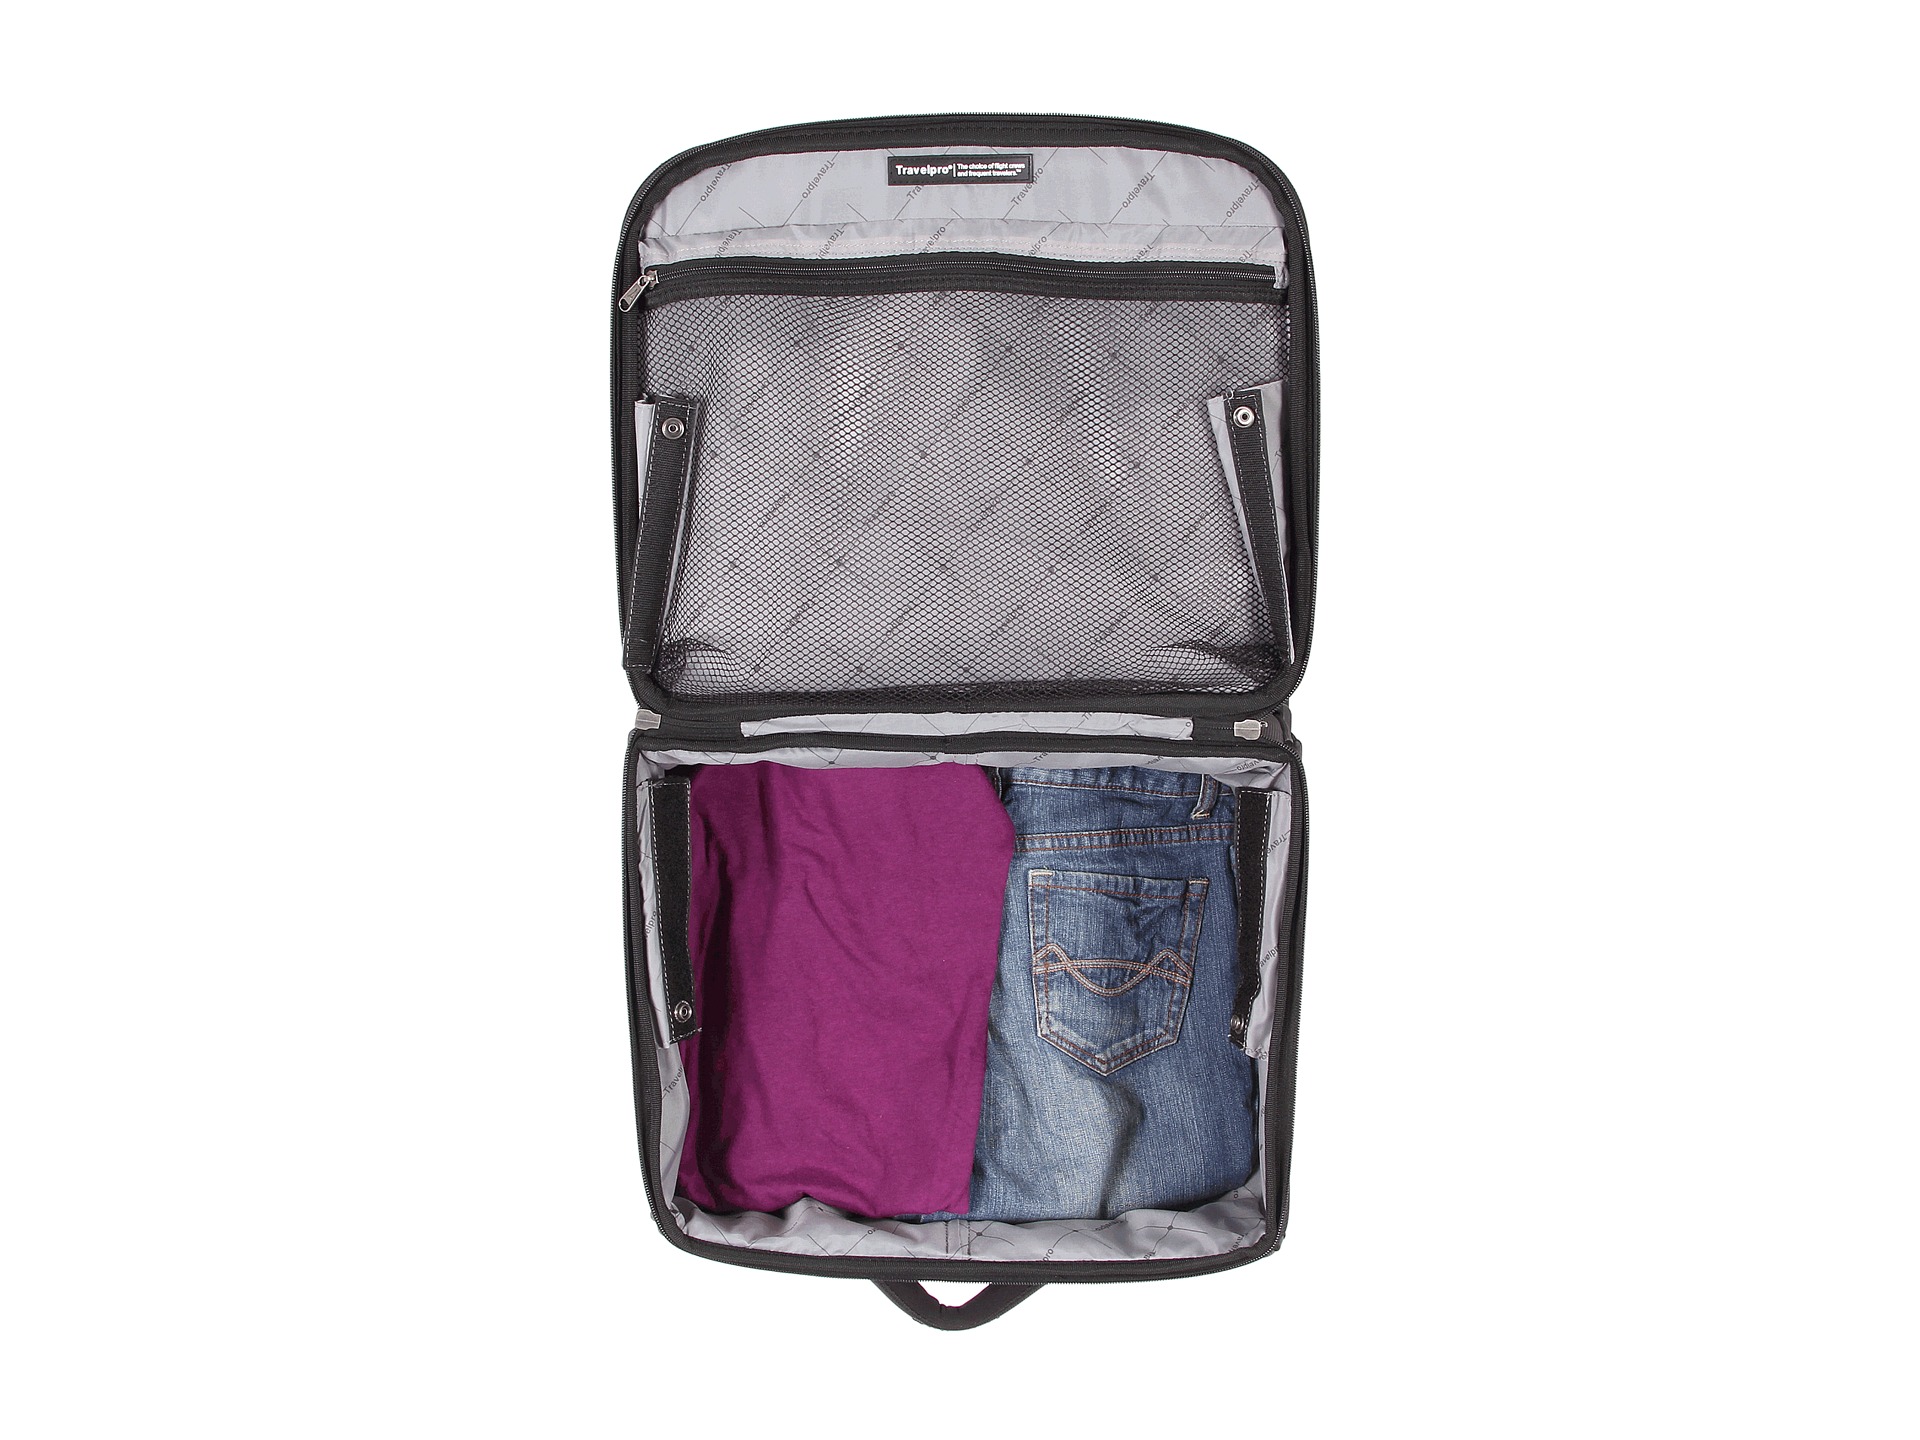 Travelpro Maxlite 2 Rolling Business Tote